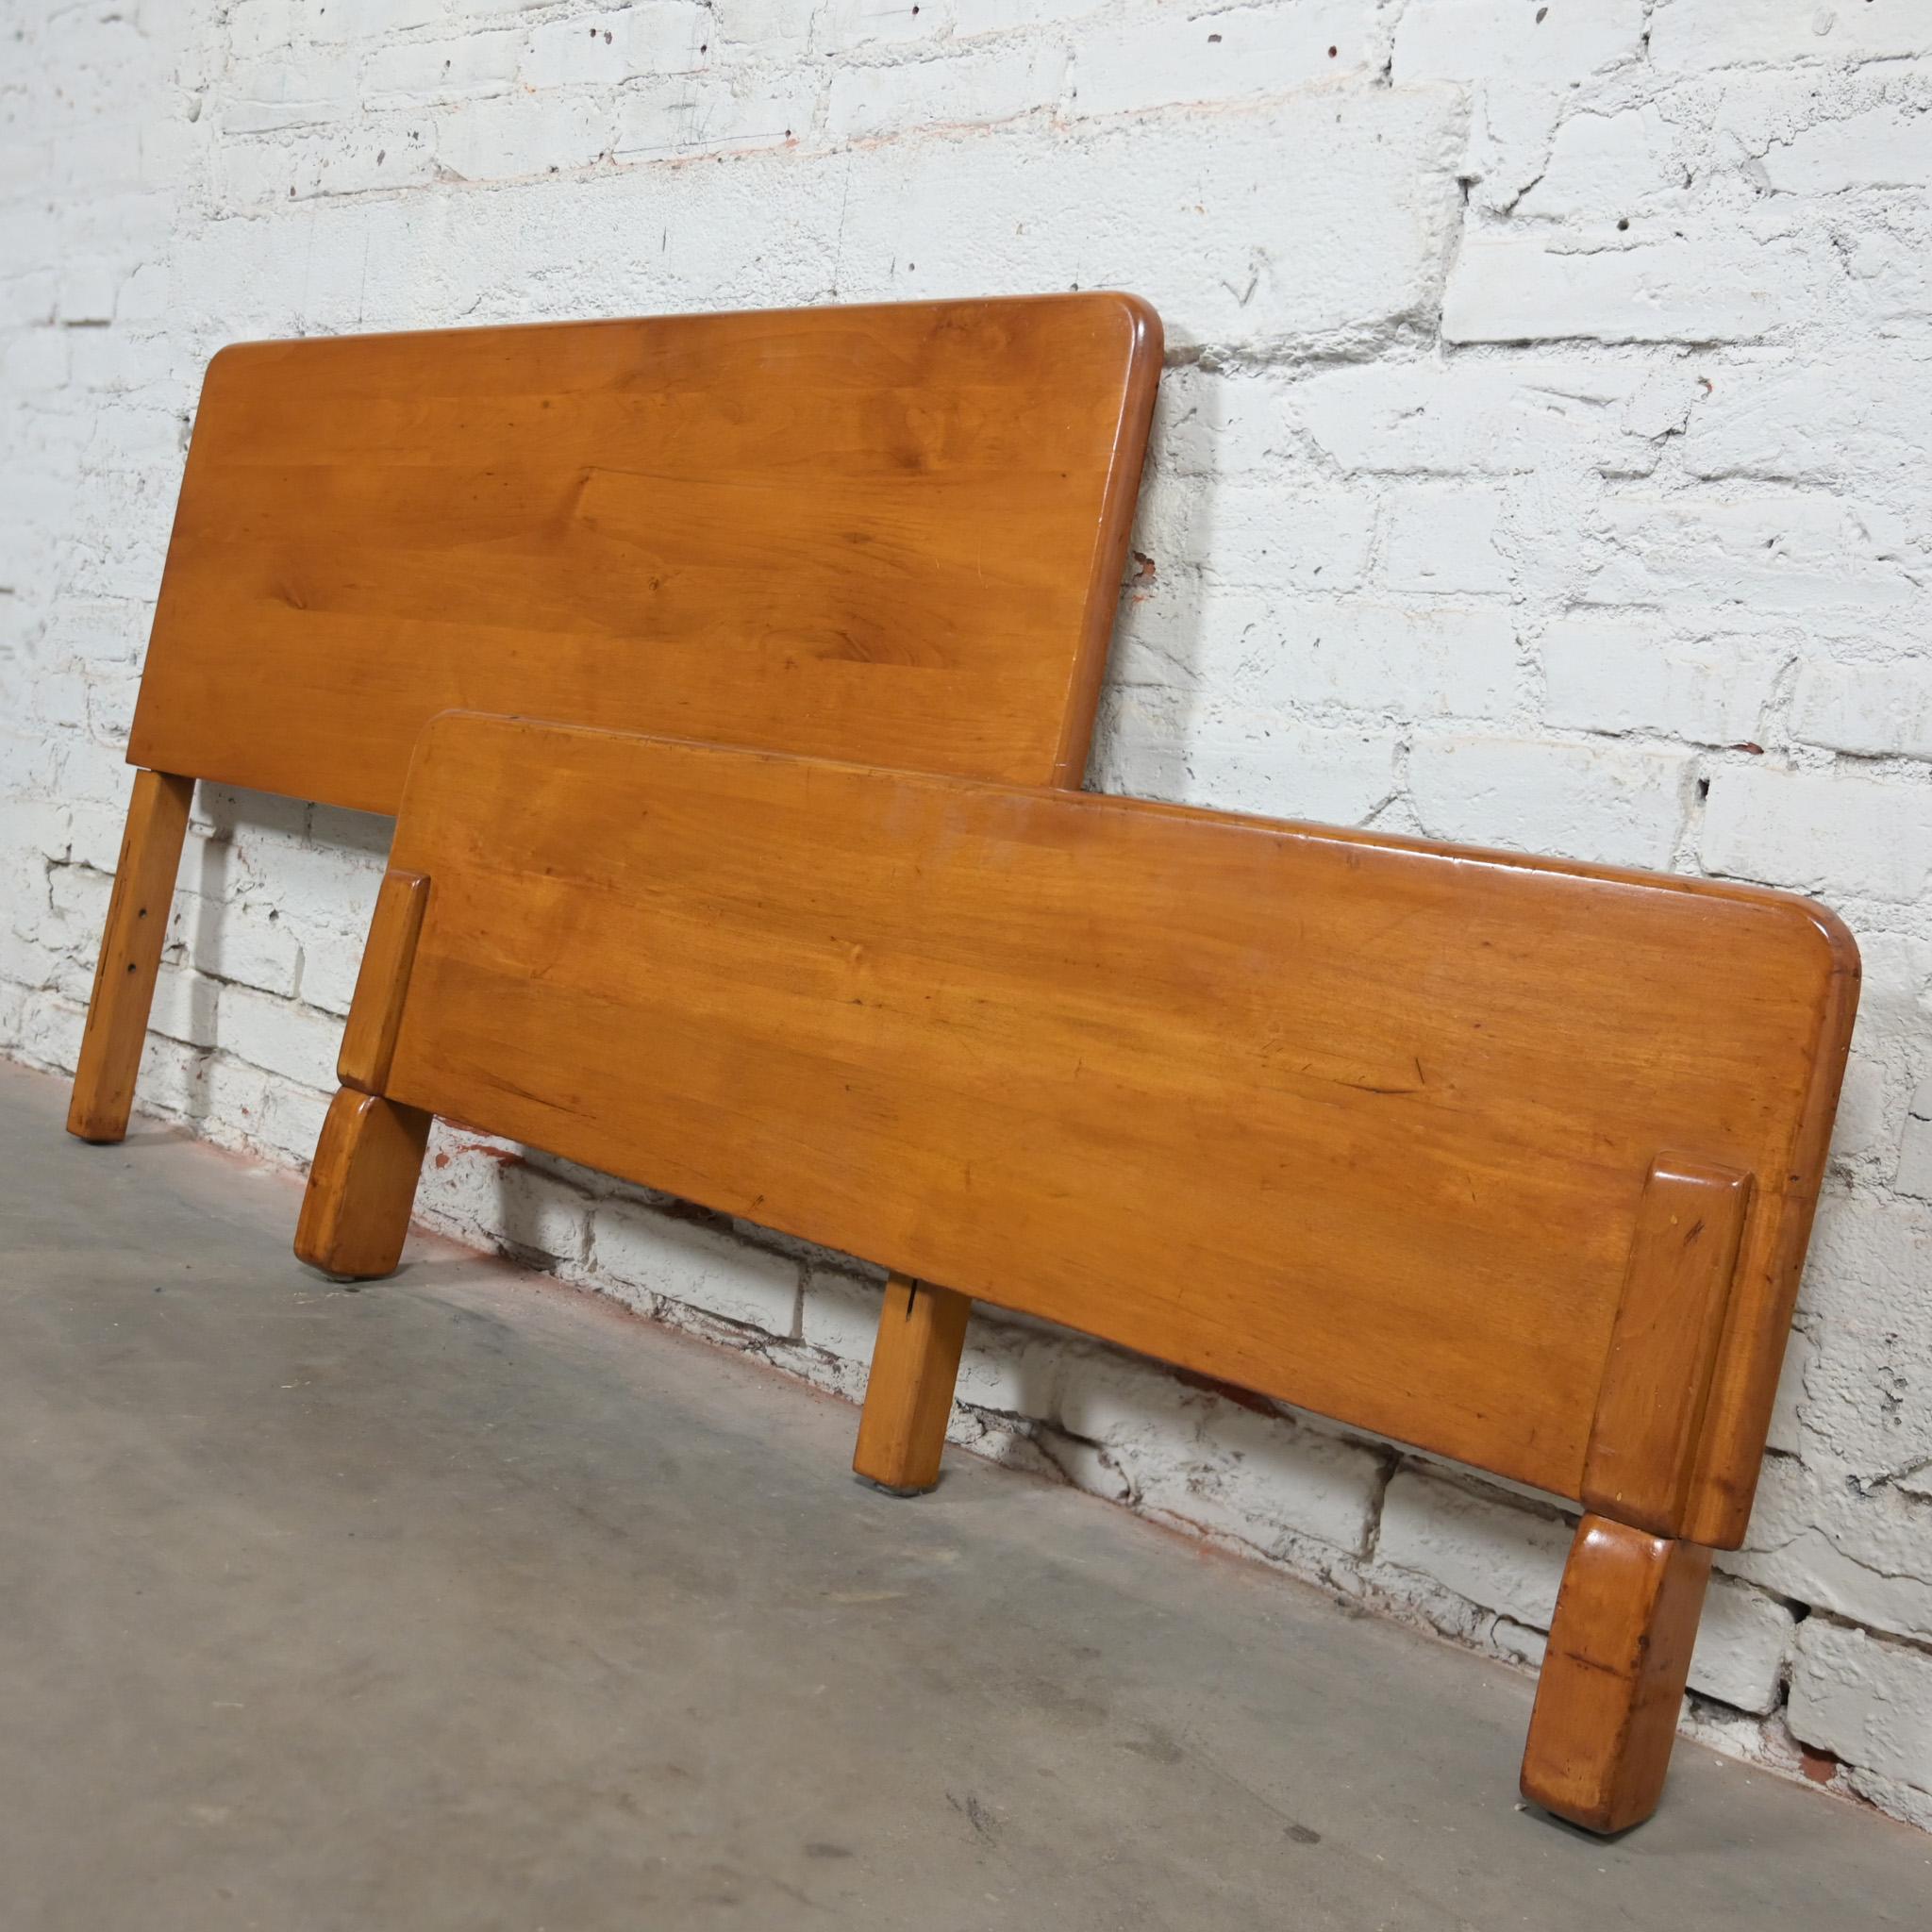 Early-Mid-20th Century Art Moderne Maple Twin Bed Headboard & Footboard  In Good Condition For Sale In Topeka, KS